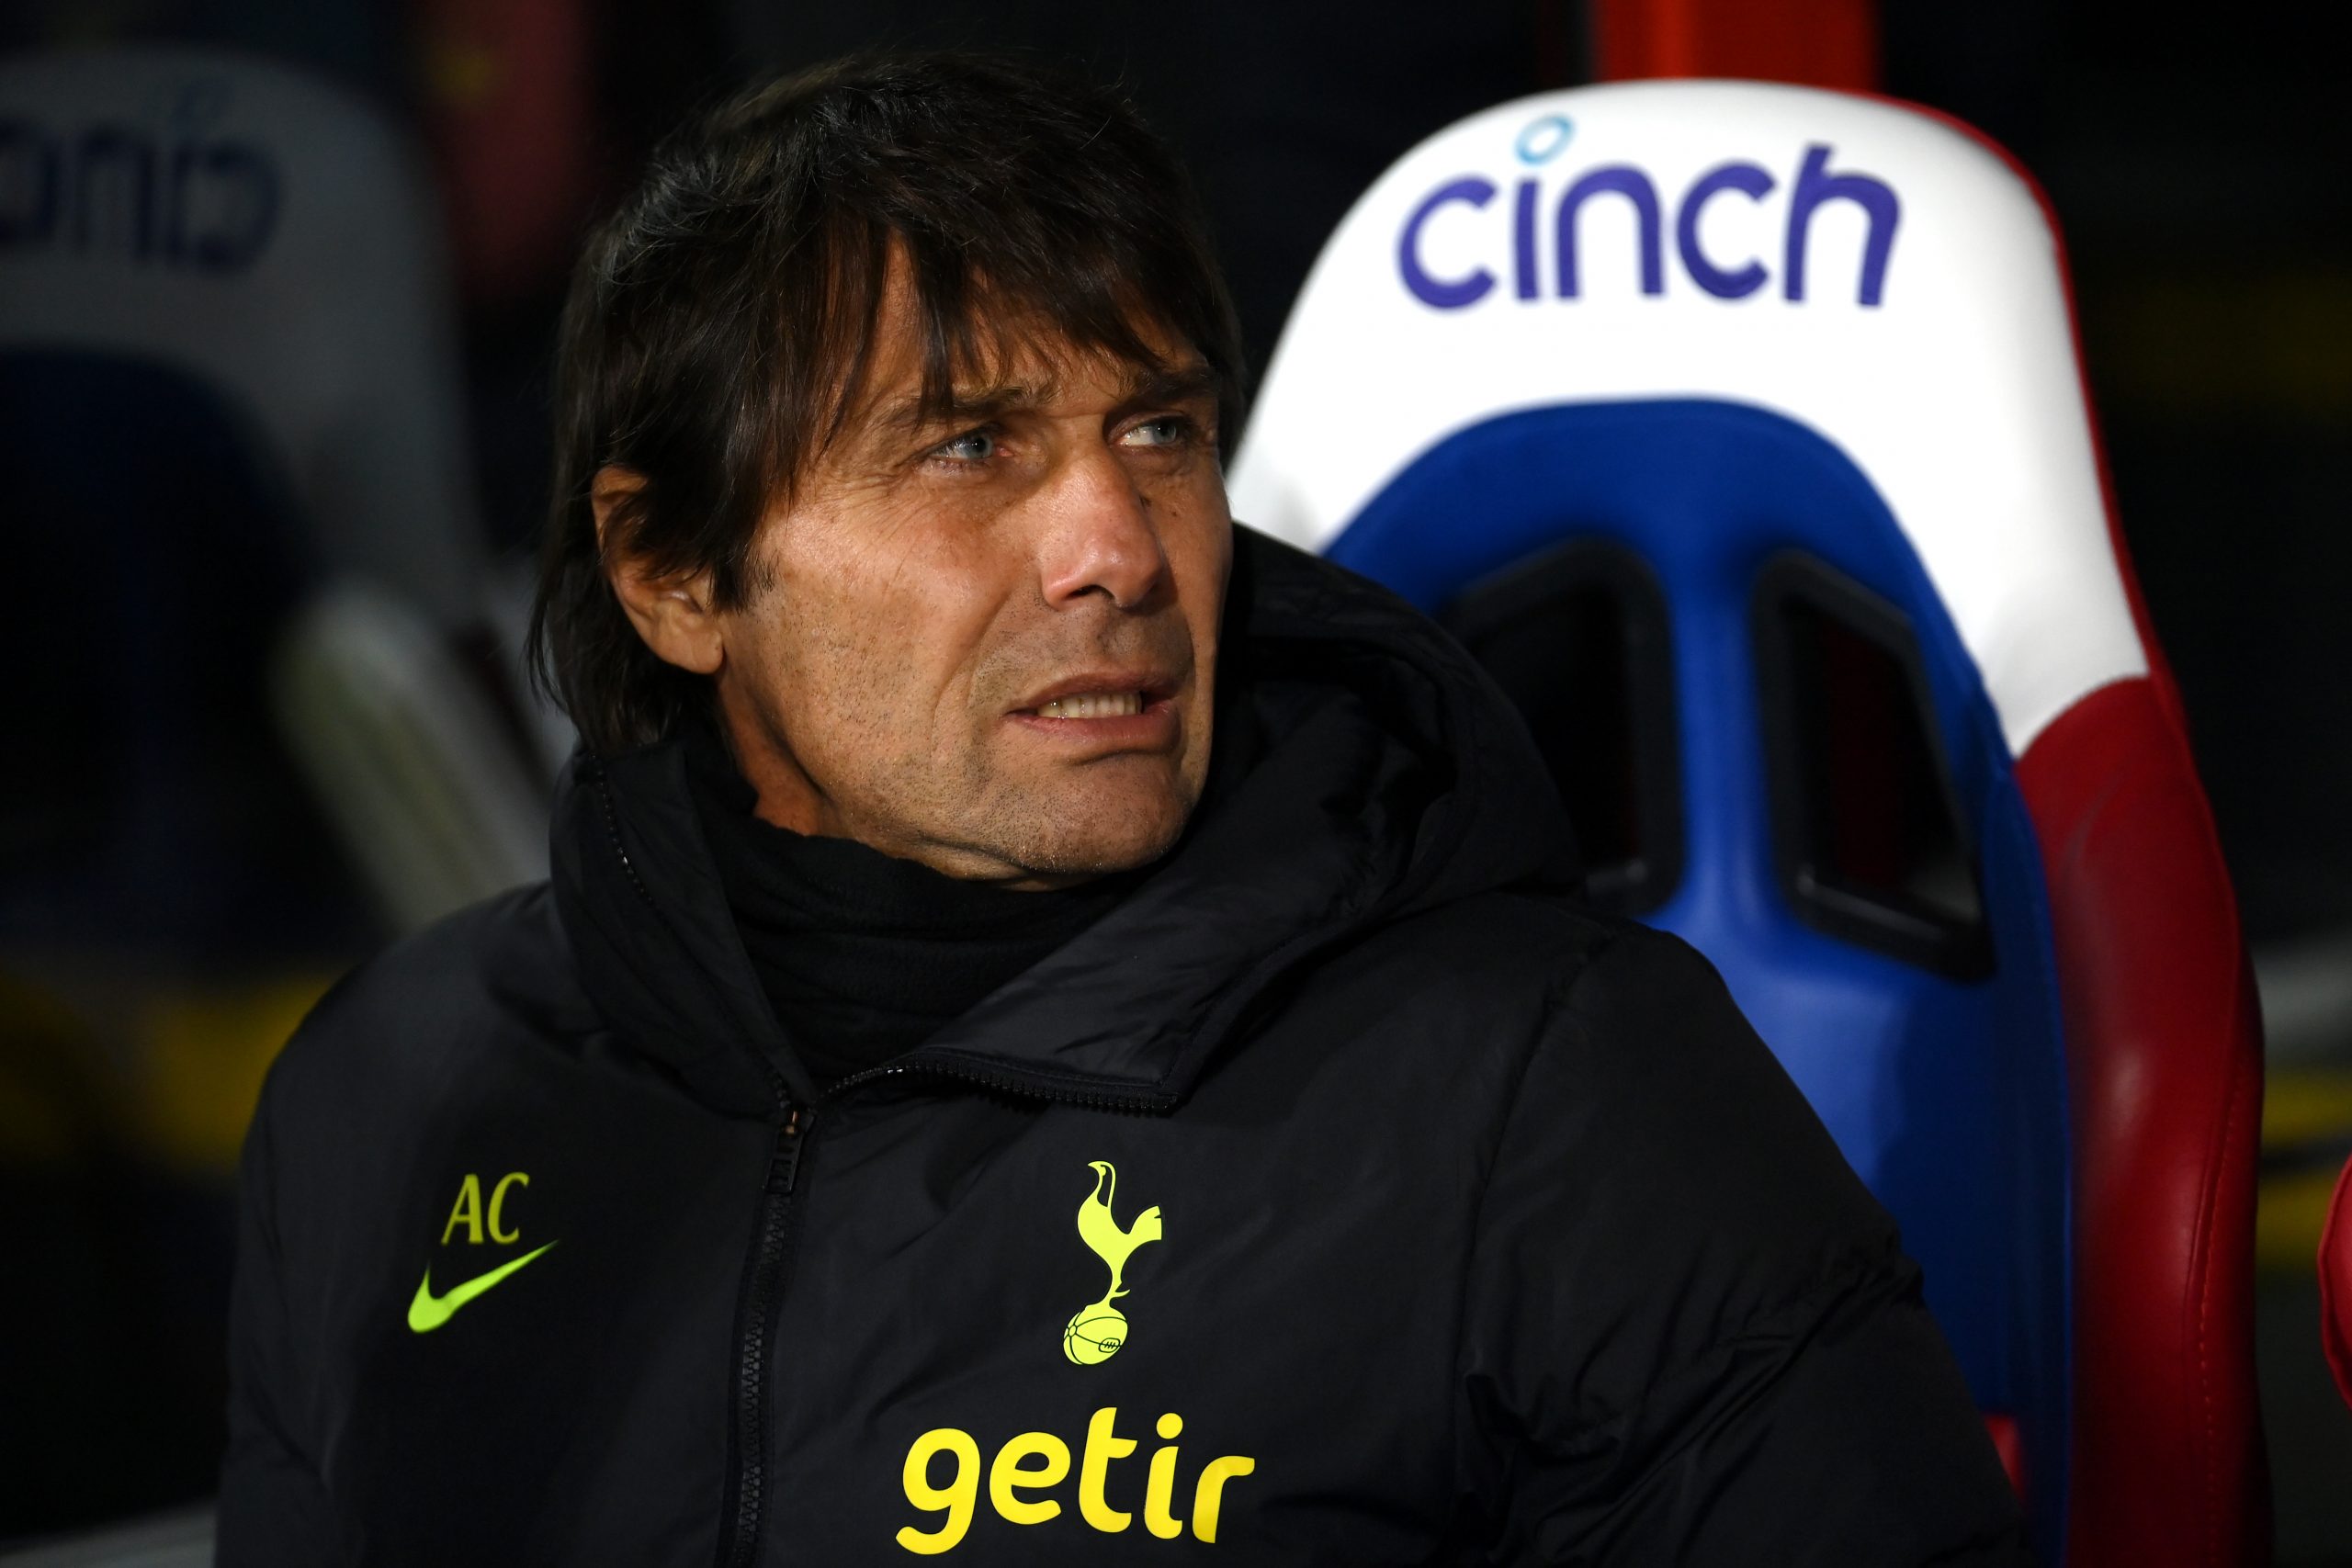 Stellini confirms Antonio Conte will be involved in the team selection for Manchester City clash.